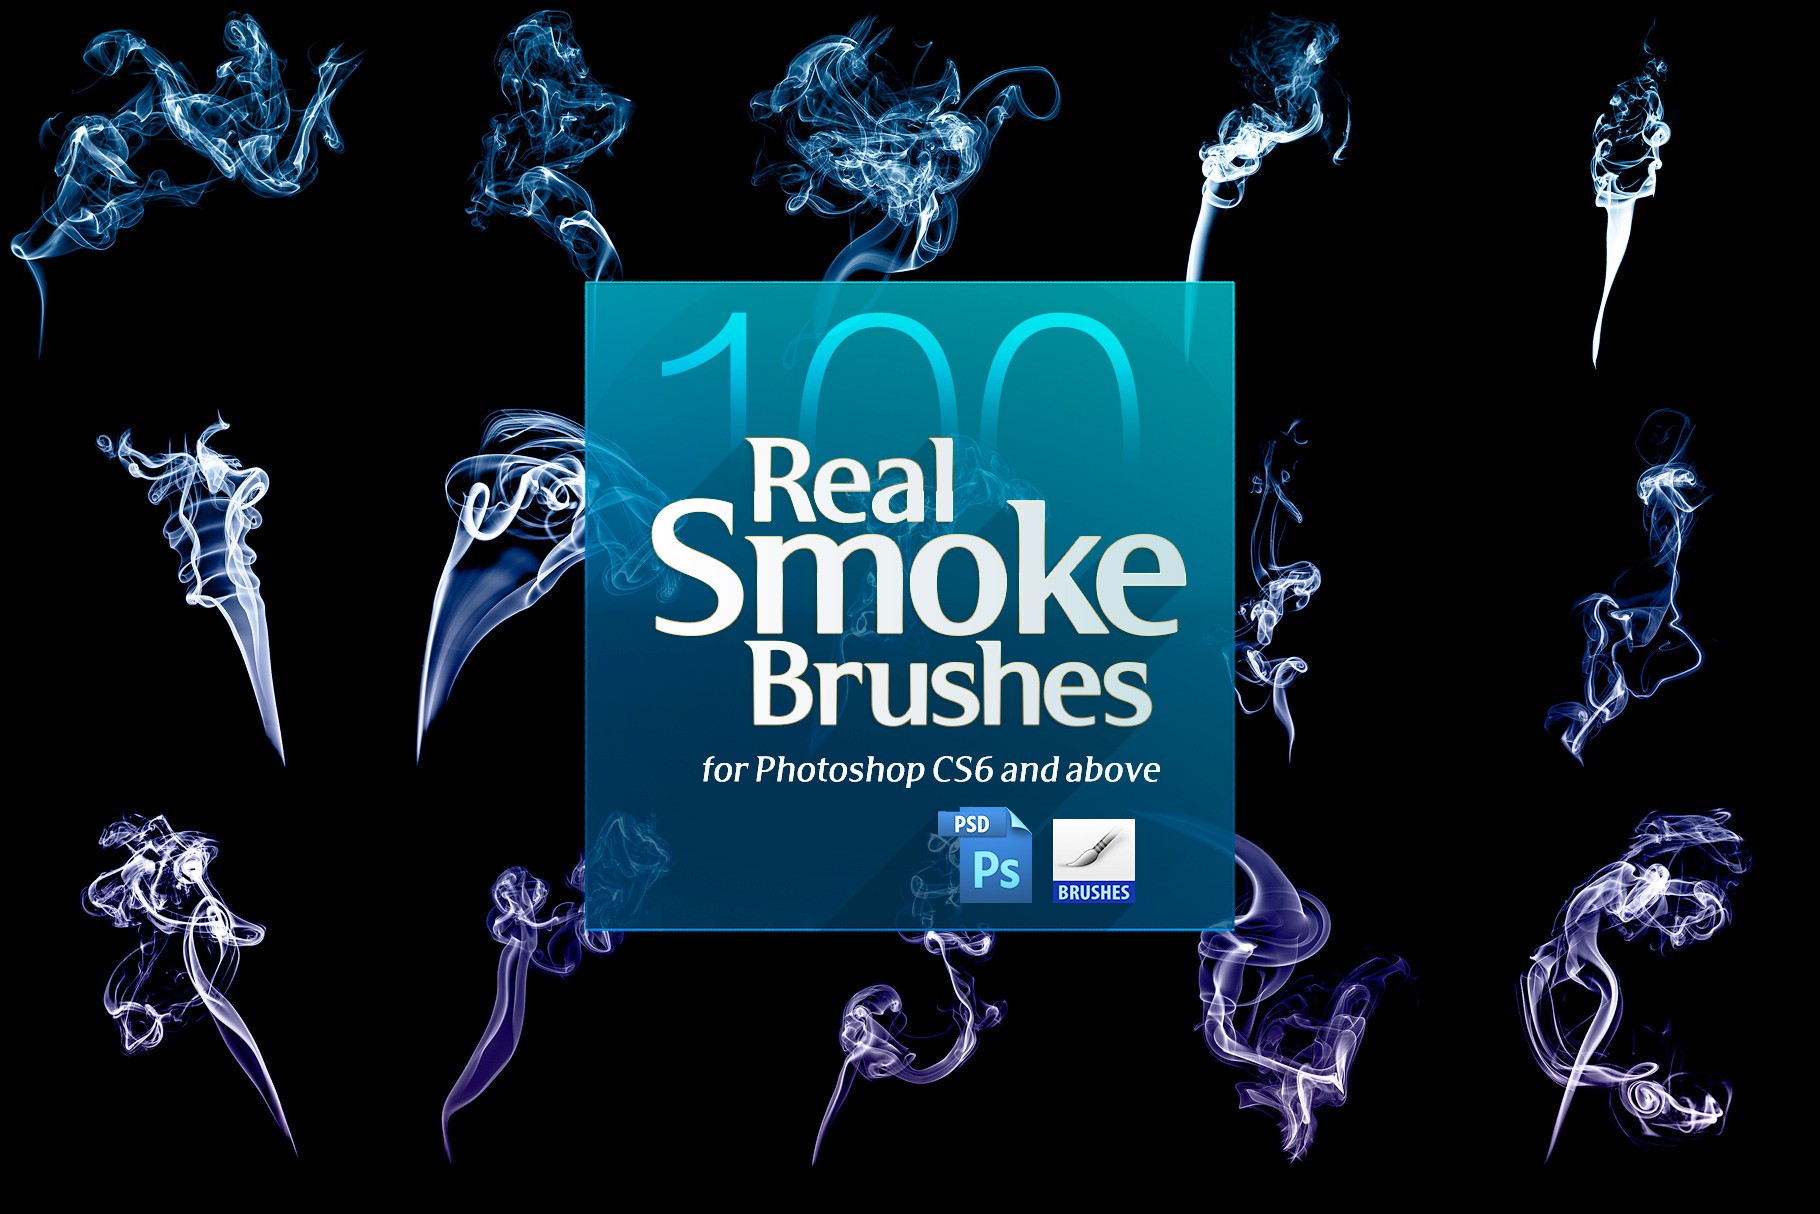 Real Smoke Brushes for Photoshop preview image.